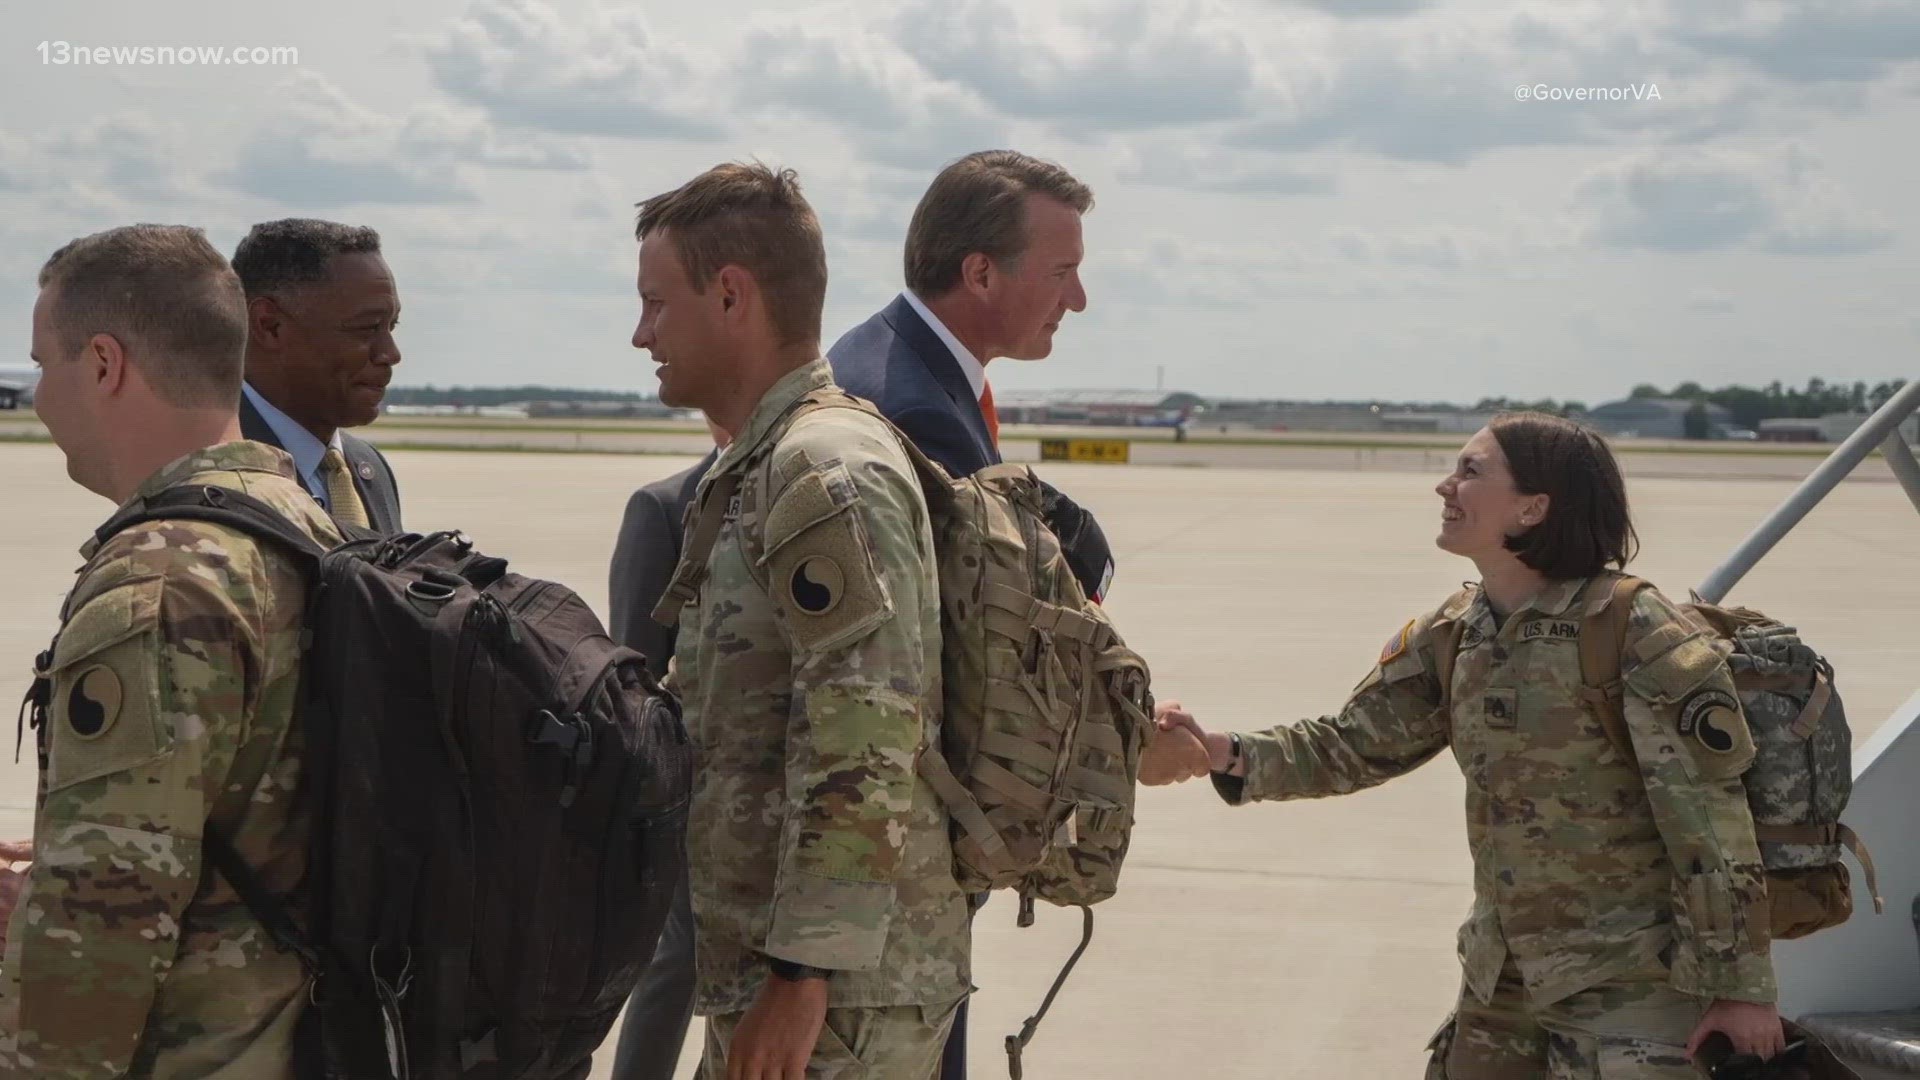 More than 100 soldiers and airmen with the Virginia National Guard are back home, after spending two weeks in Texas.